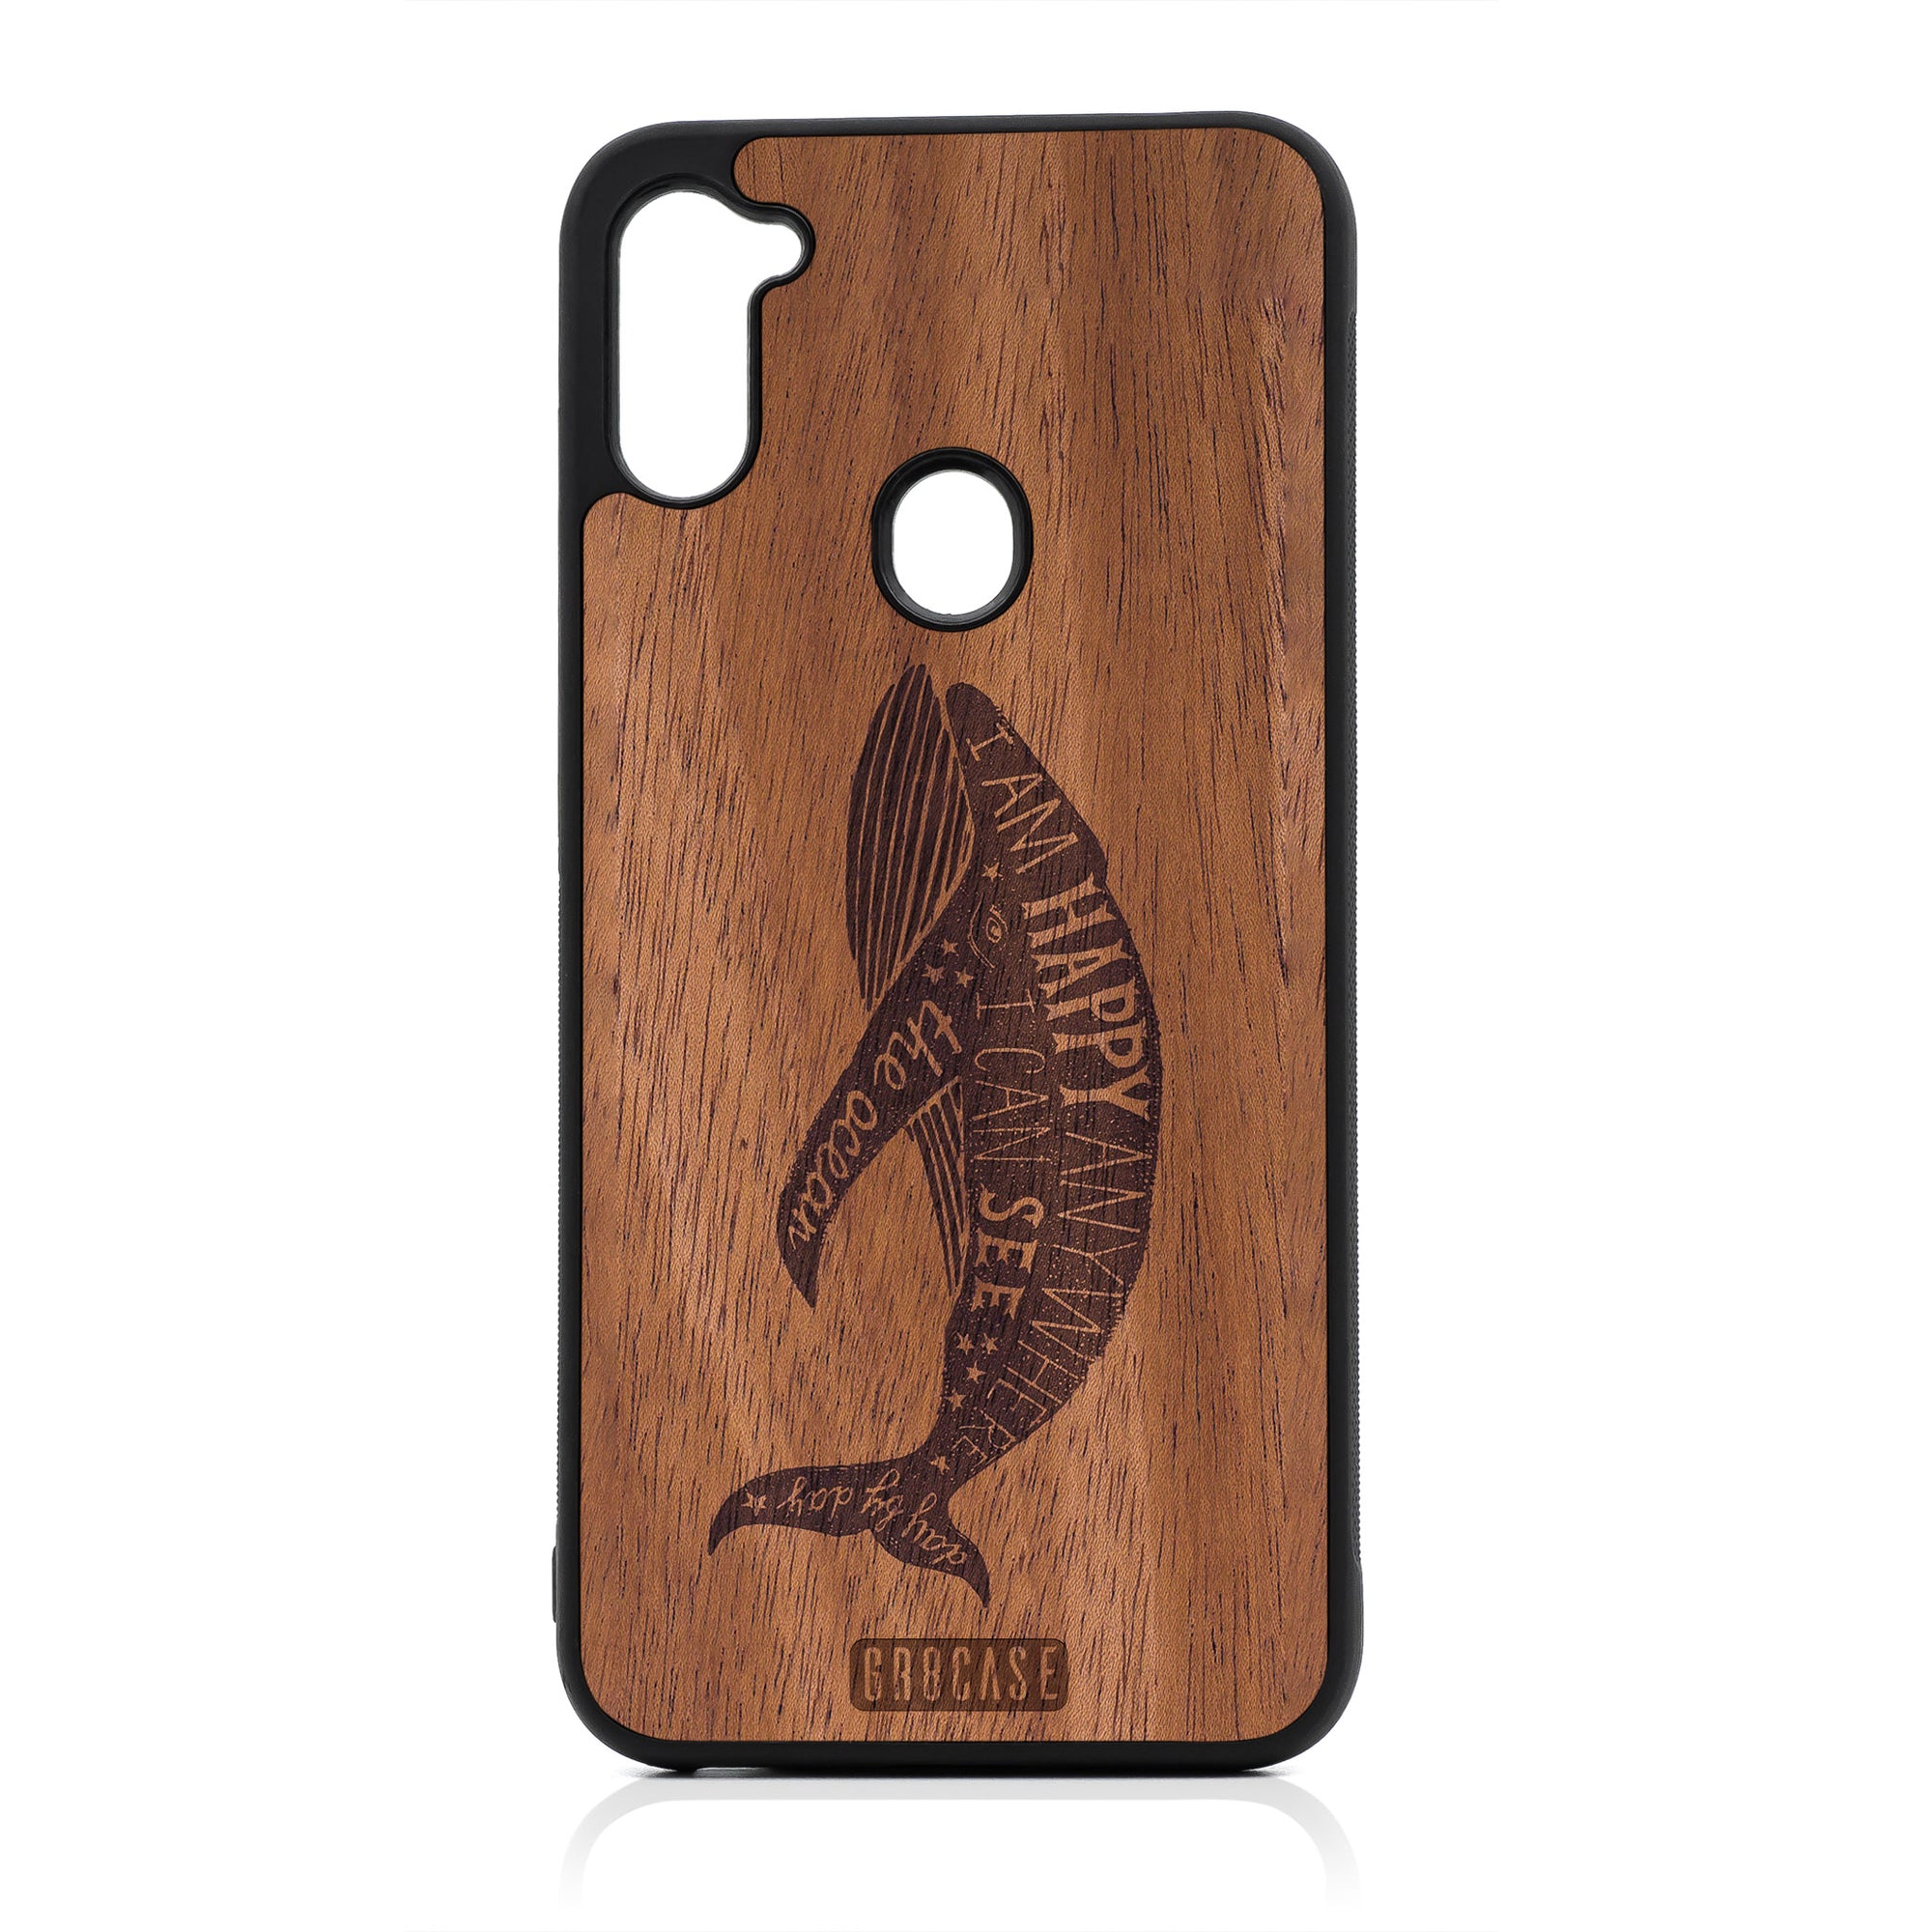 I'm Happy Anywhere I Can See The Ocean (Whale) Design Wood Case For Samsung Galaxy A11